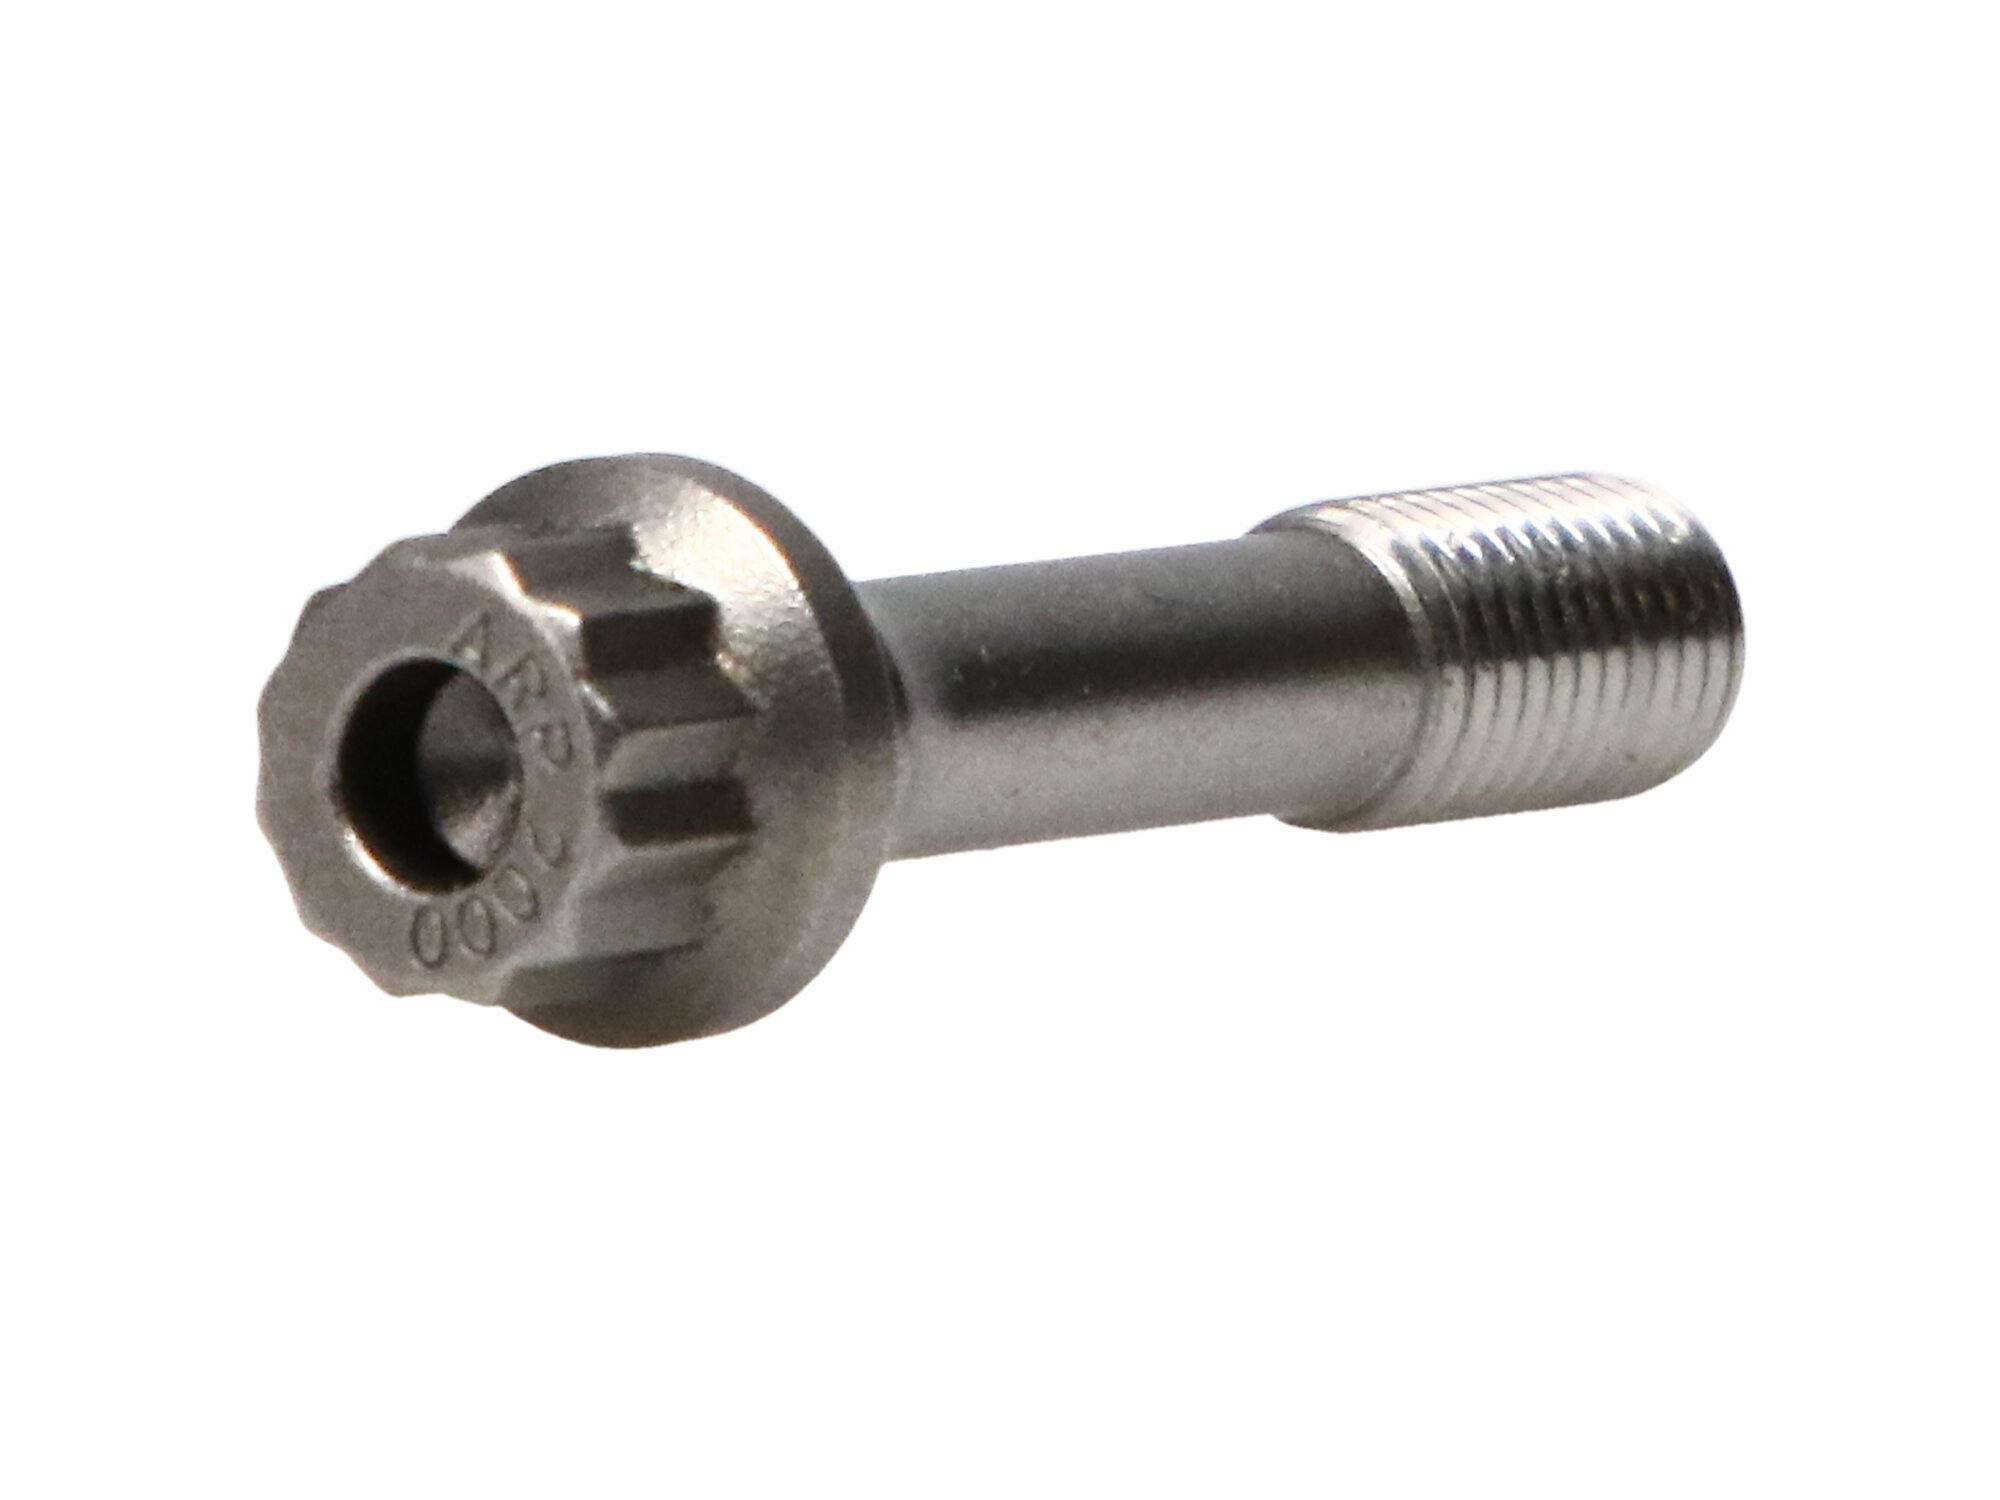 12mm X 1.800 in. Length, ARP 2000, Connecting Rod Bolt